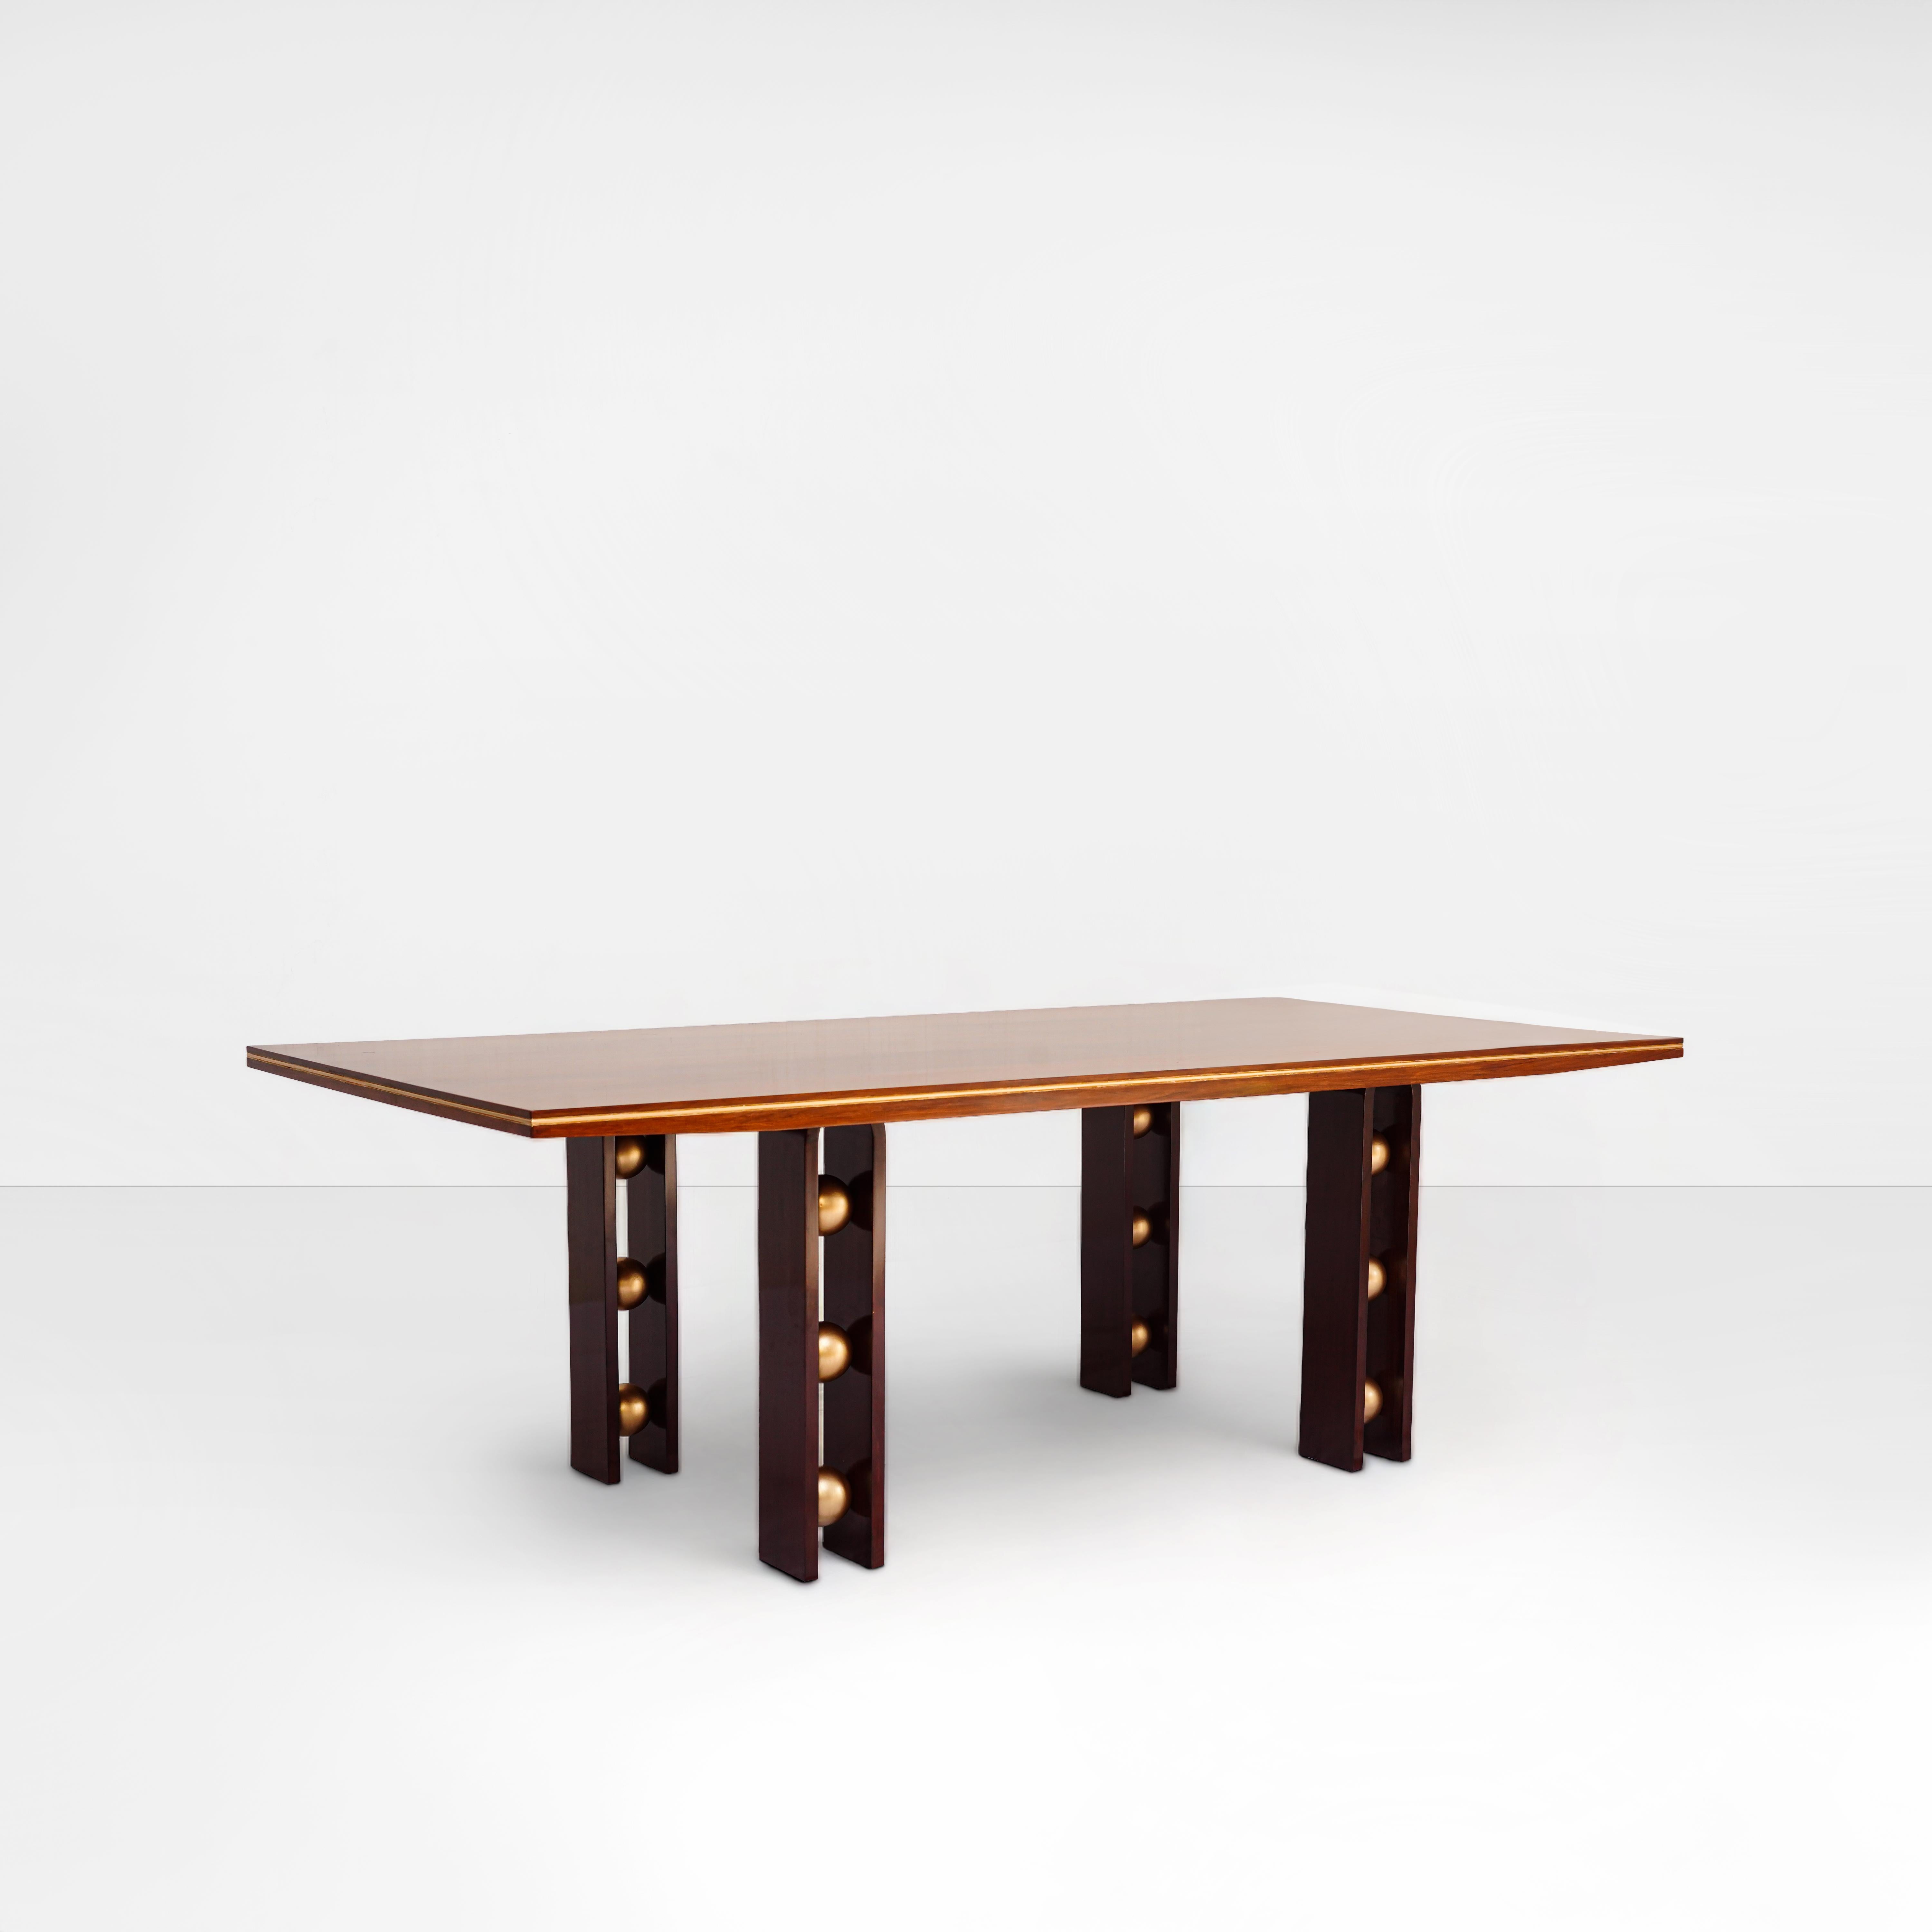 Original industrial, Geometric, bold, transitional, modern dining table, walnut In New Condition For Sale In Greenwood Village, CO